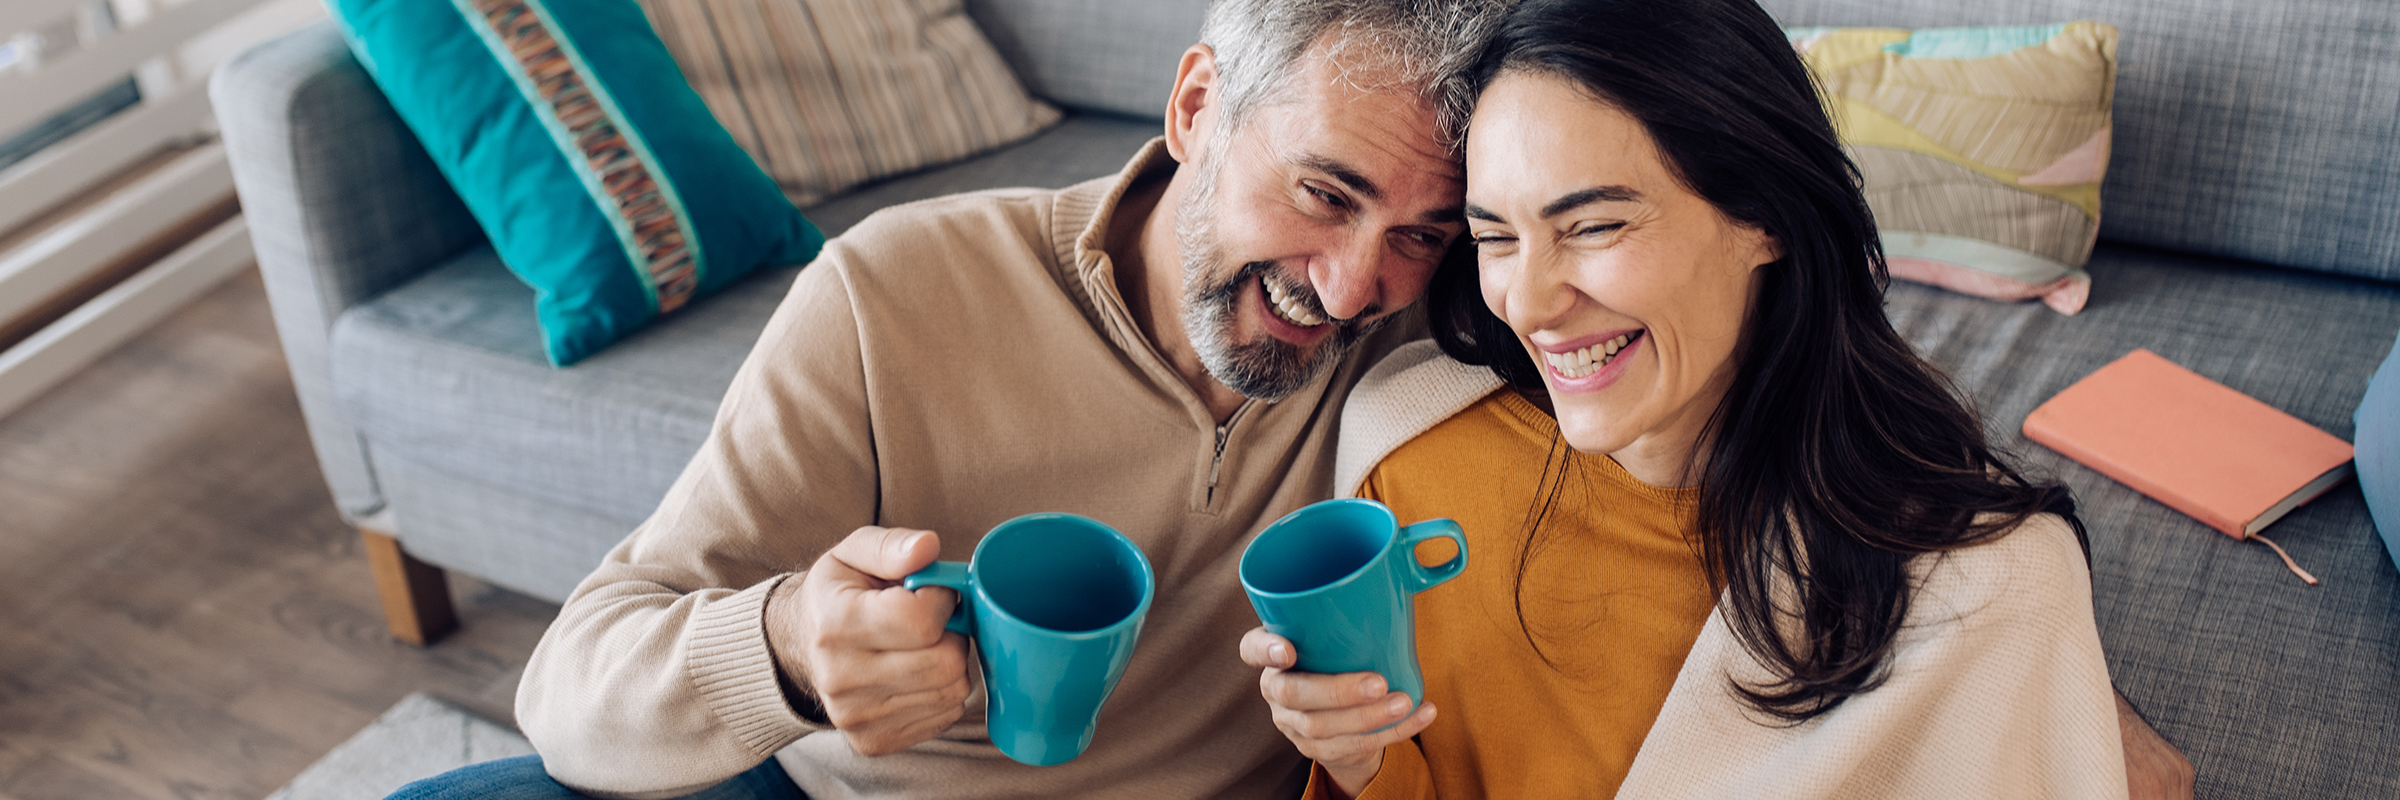 Couple in their home smiling and drinking coffee.